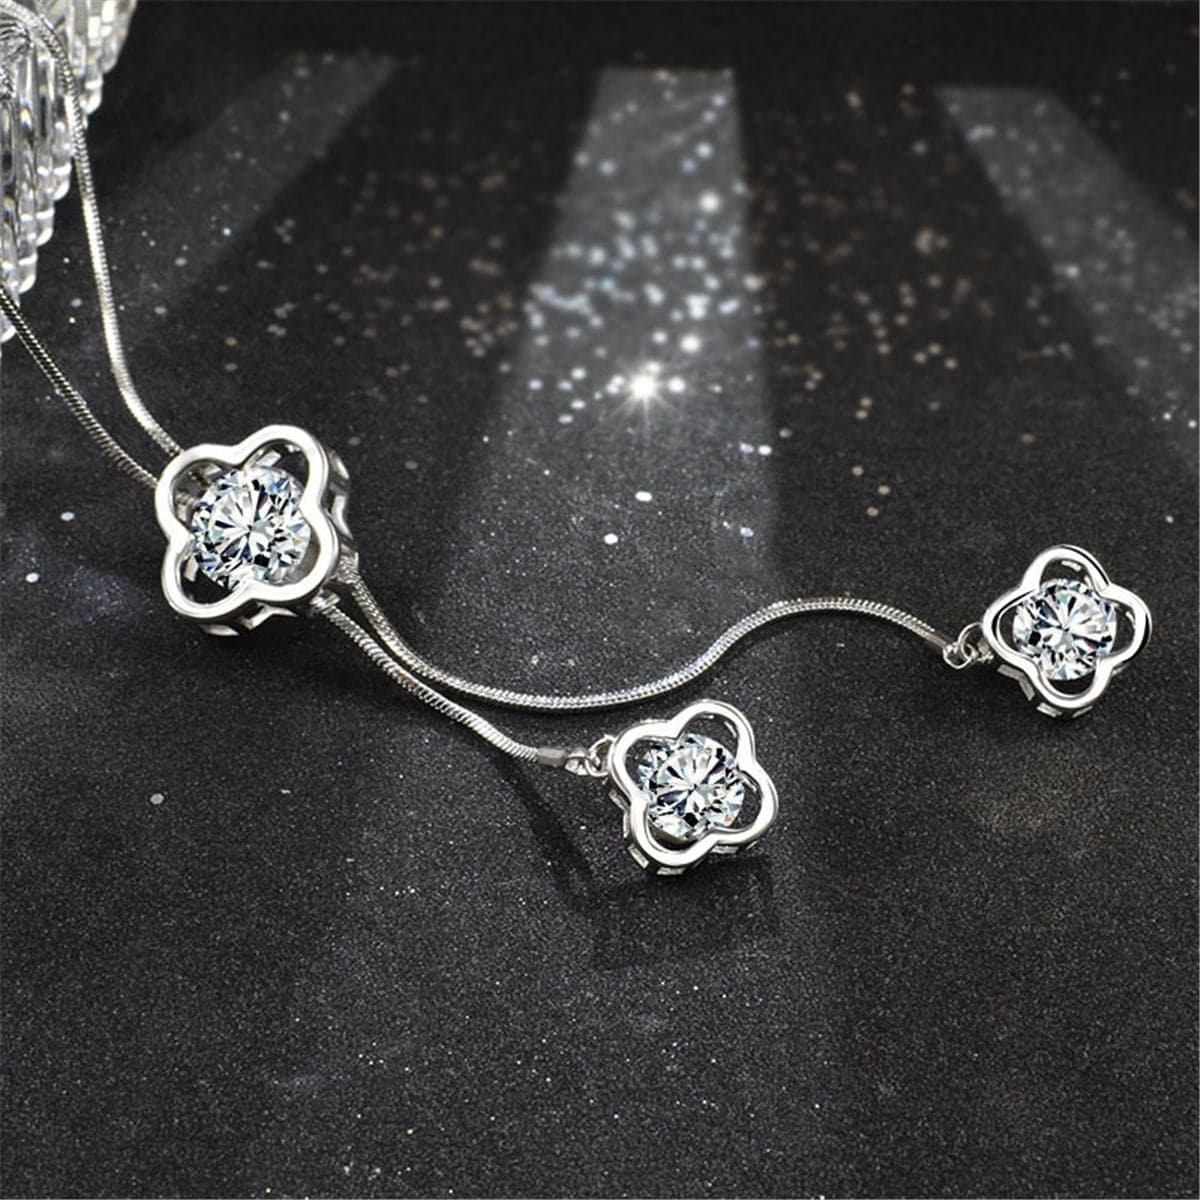 Cubic Zirconia & Silver-Plated Triple-Clover Pendant Necklace